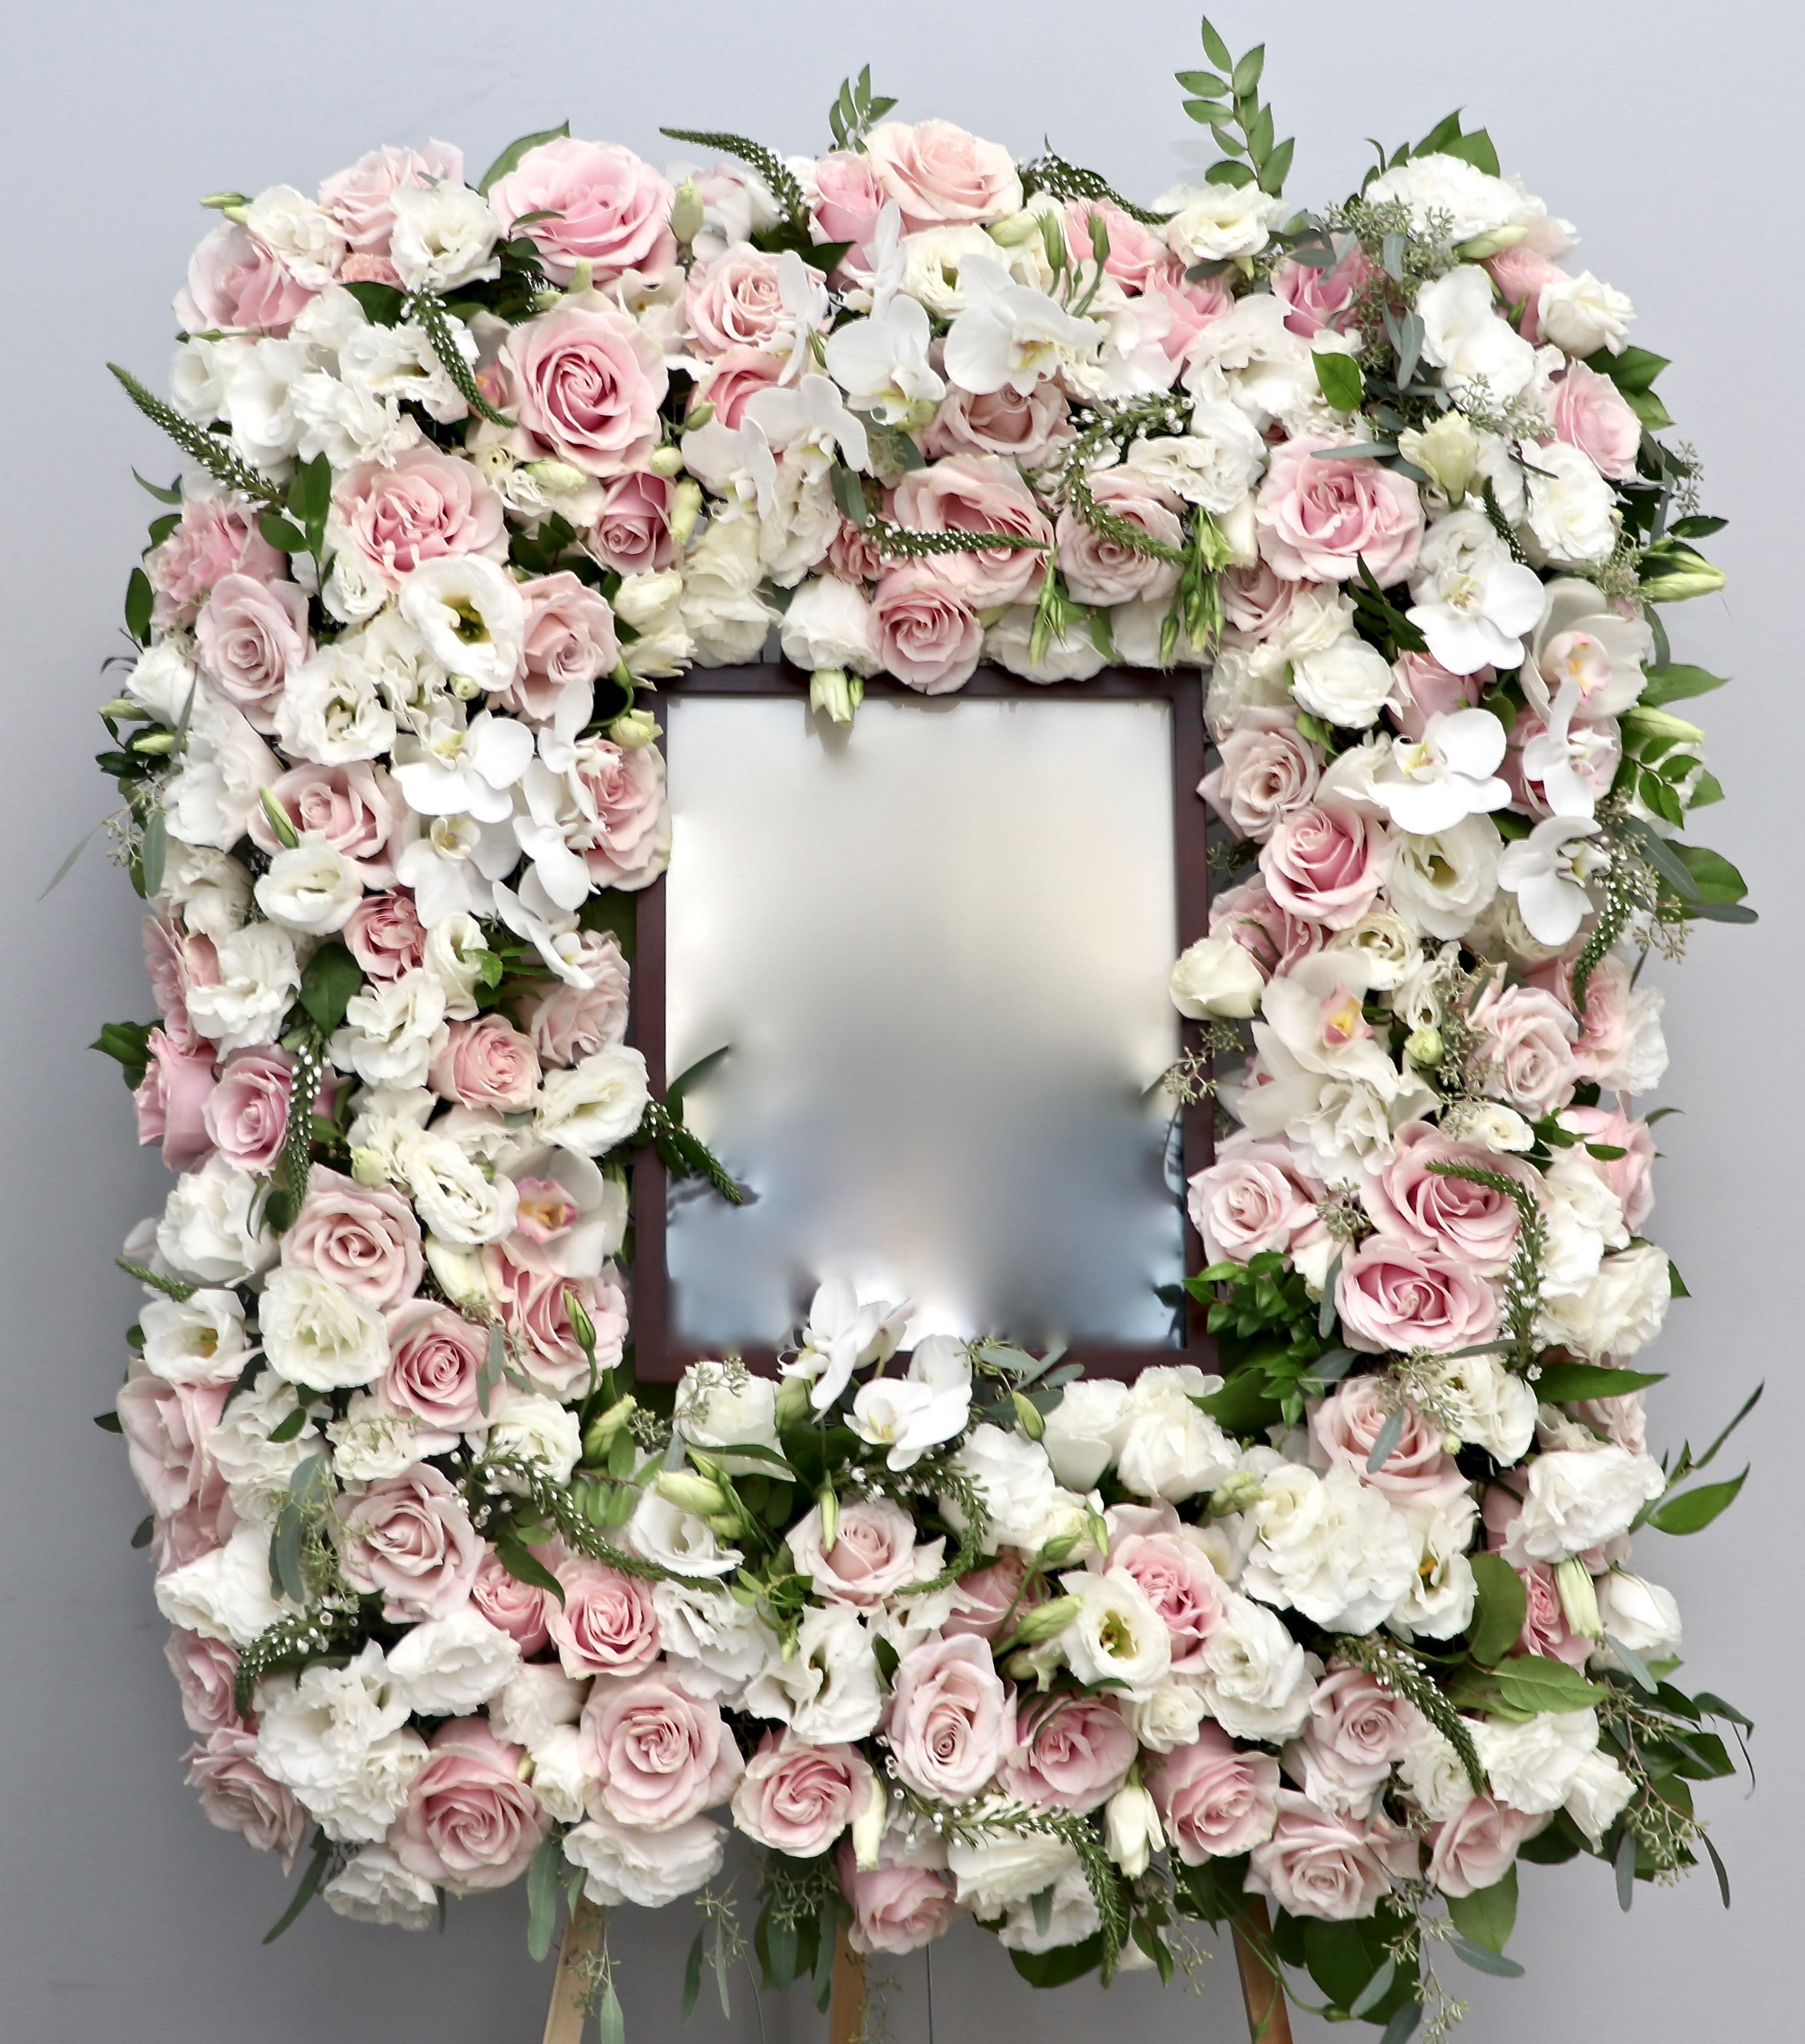 Pink Frame  - With a mix of white and pink roses, orchids and seasonal greens this sympathy arrangement is approximately 32 inches tall.